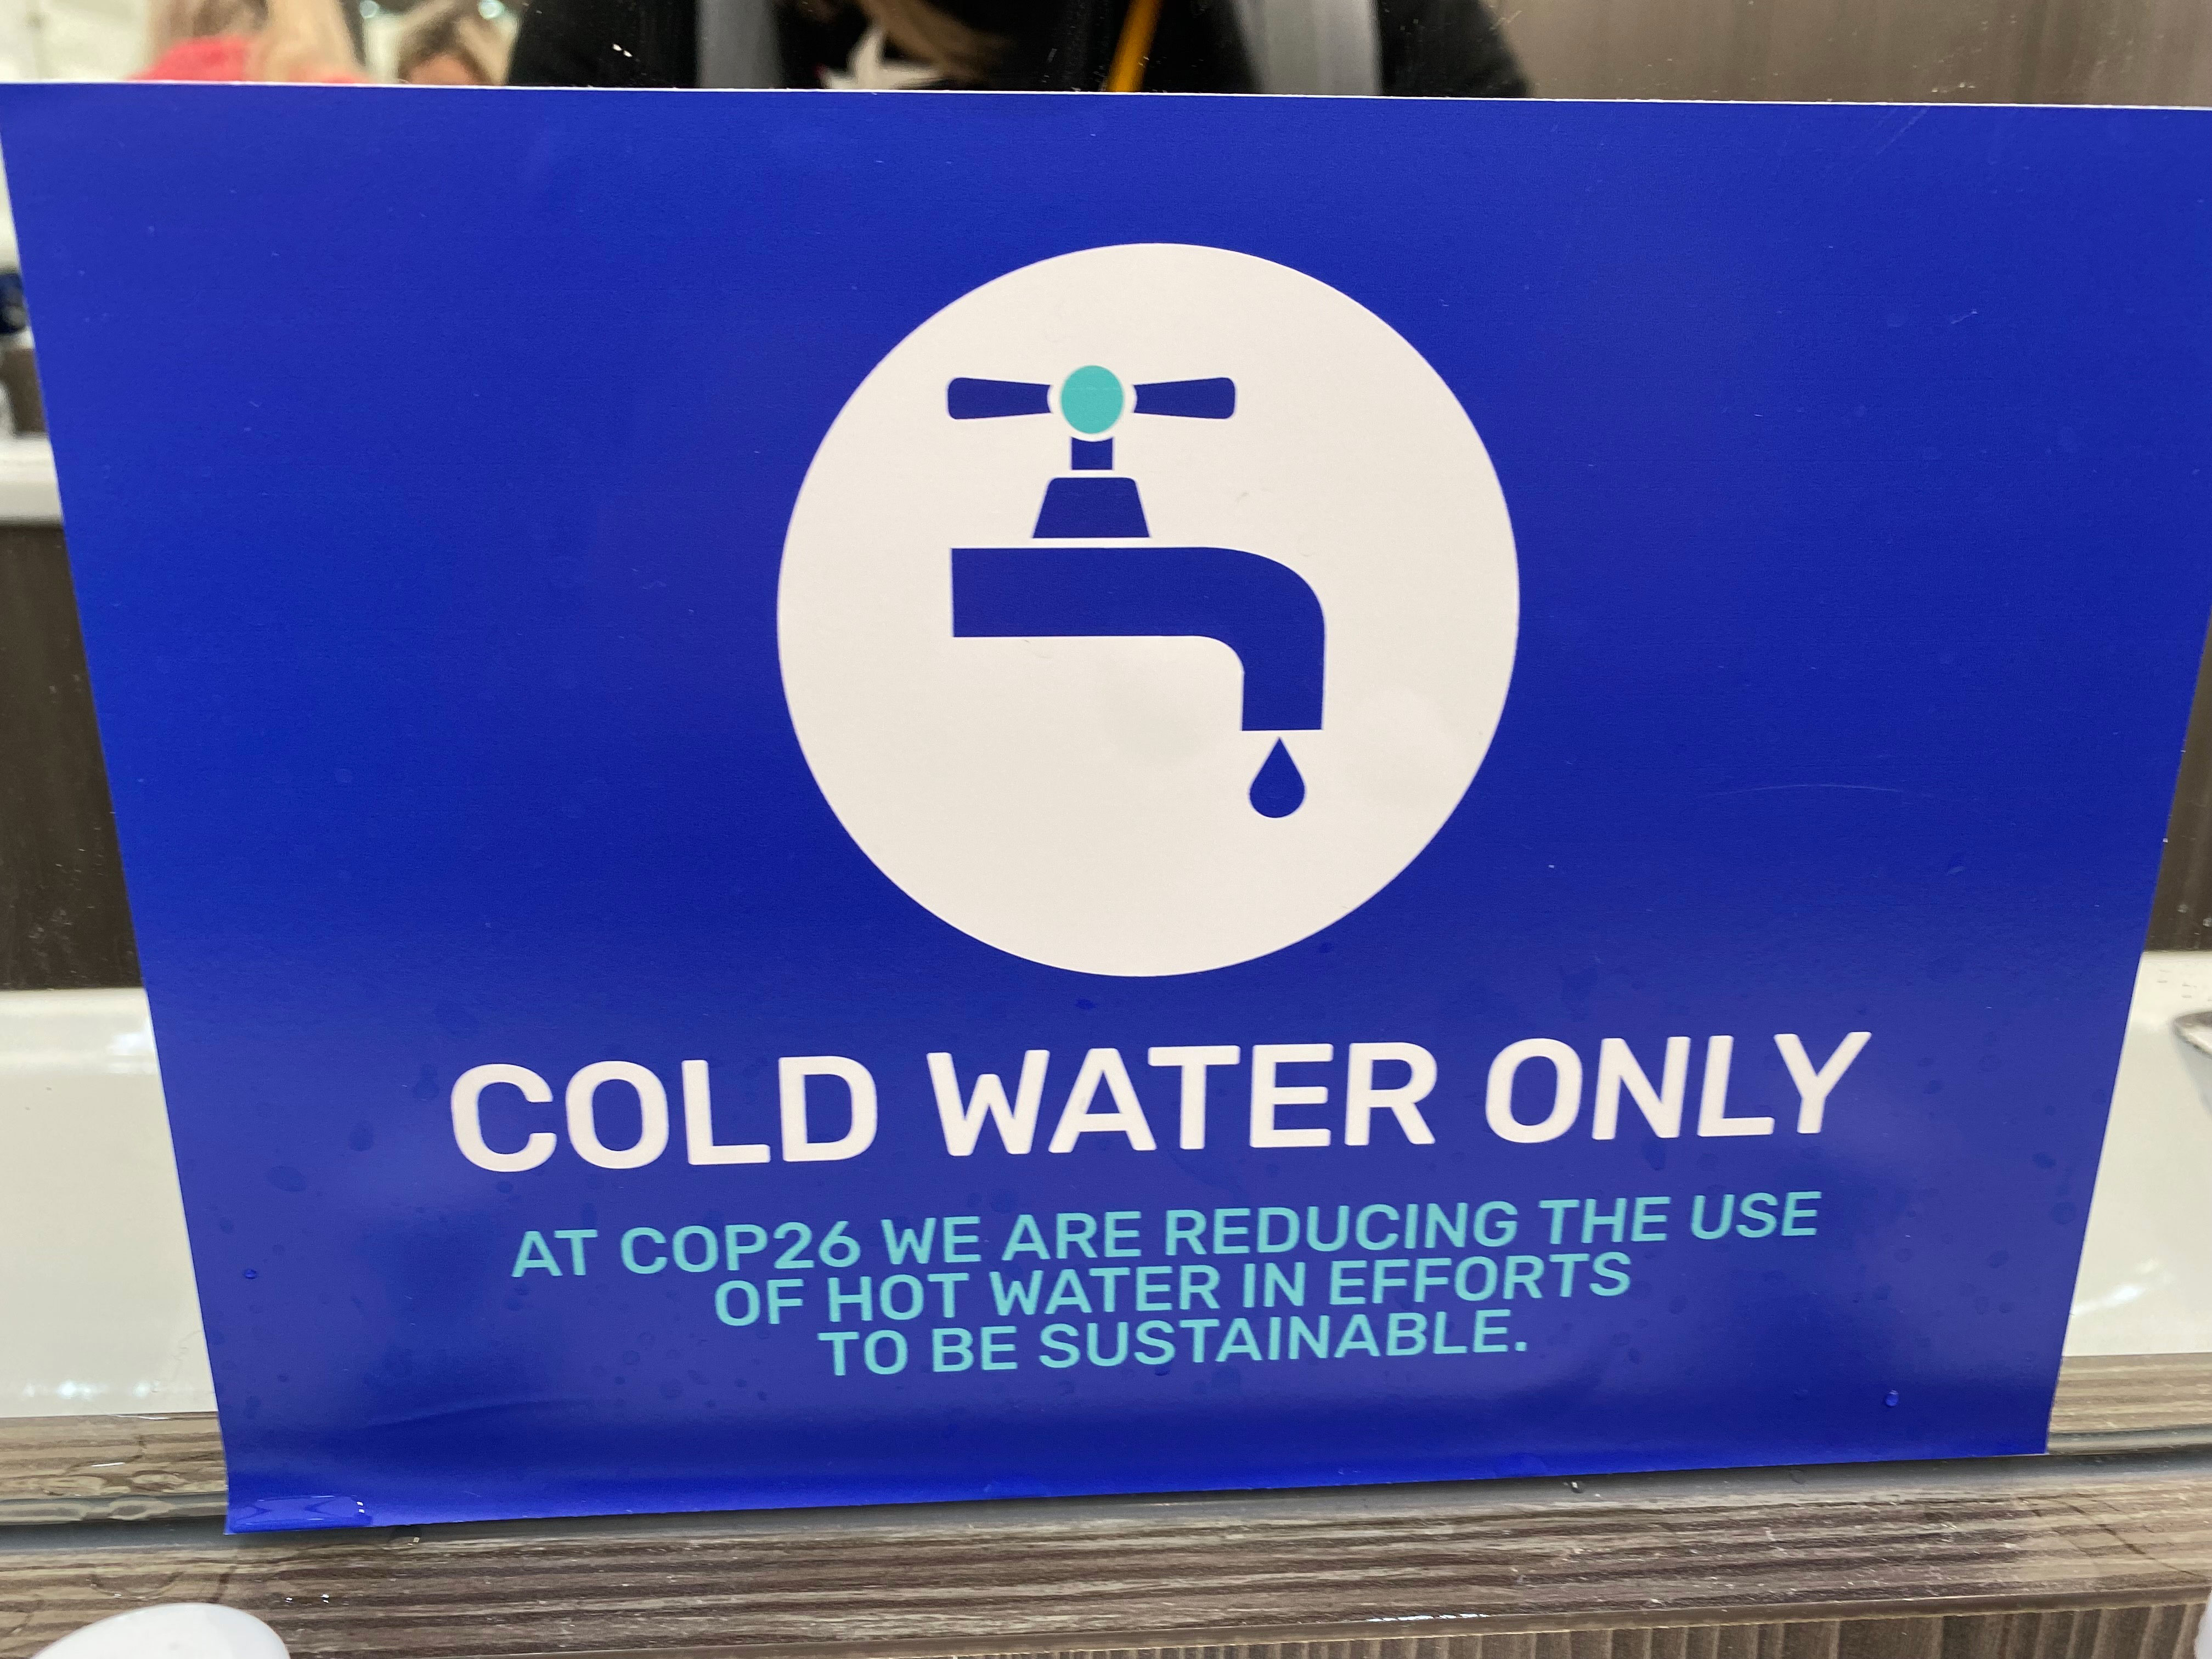 A sign about "cold water only" is in a bathroom at COP26 on November 1.